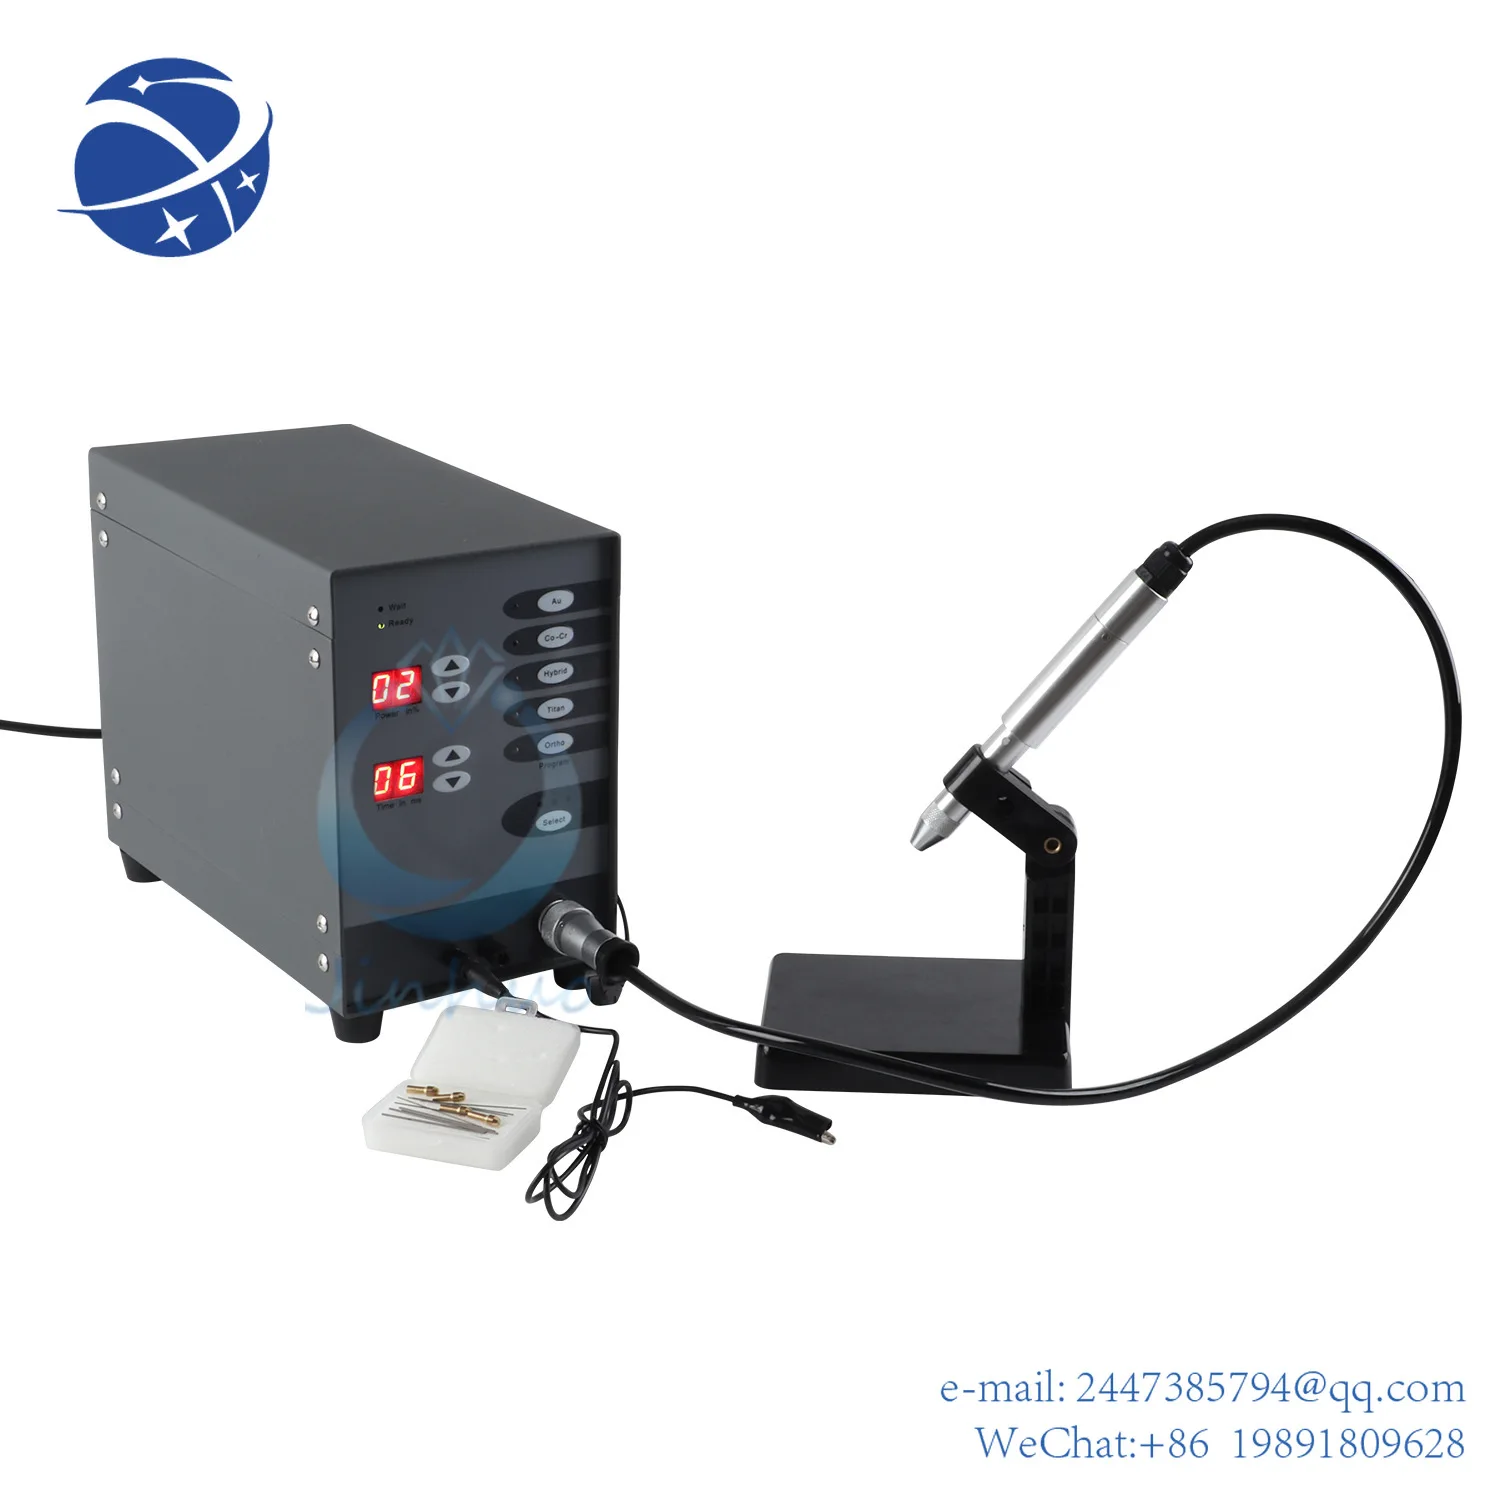 

Yun Yi The Lowest Price Automatic Spot Welding Machine Computer Numerical Control Pulse Argon Arc